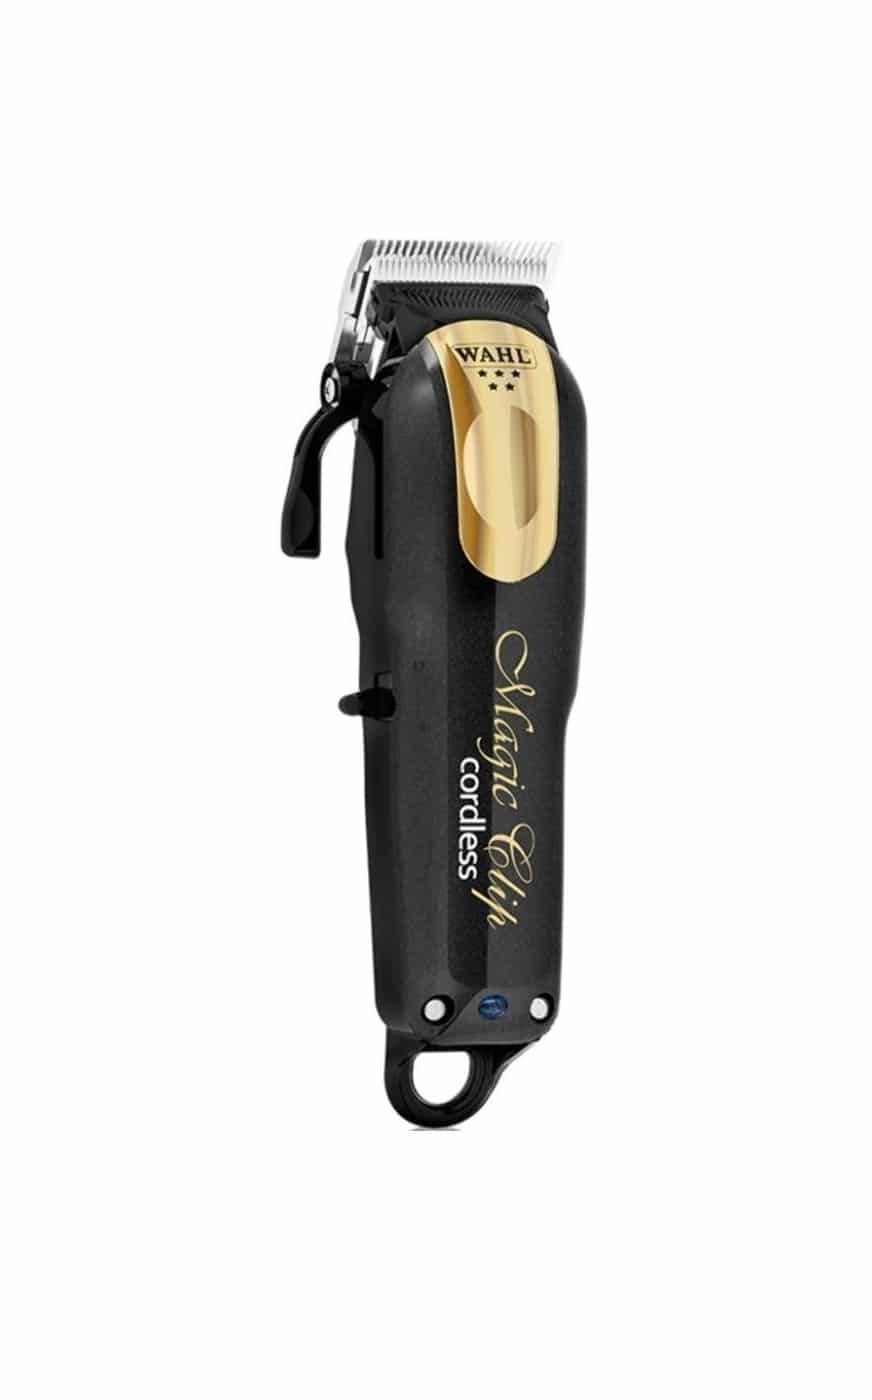 wahl magic clip weight